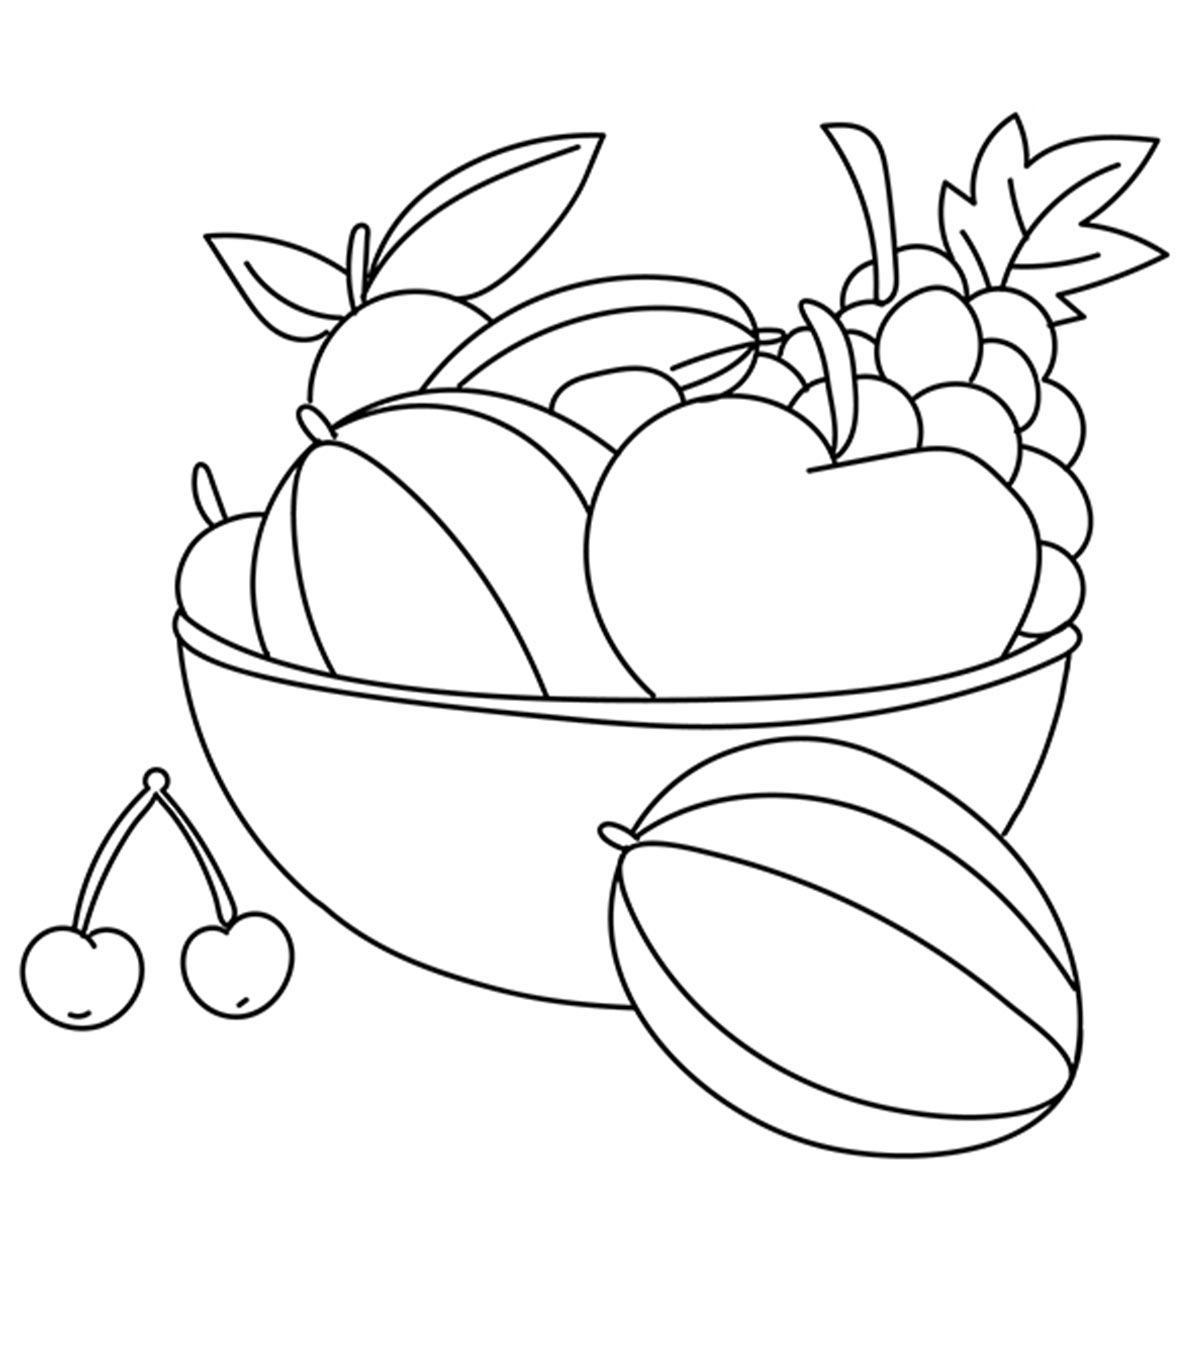 Top 10 Best Cherry Coloring Pages For Your Little Ones_image